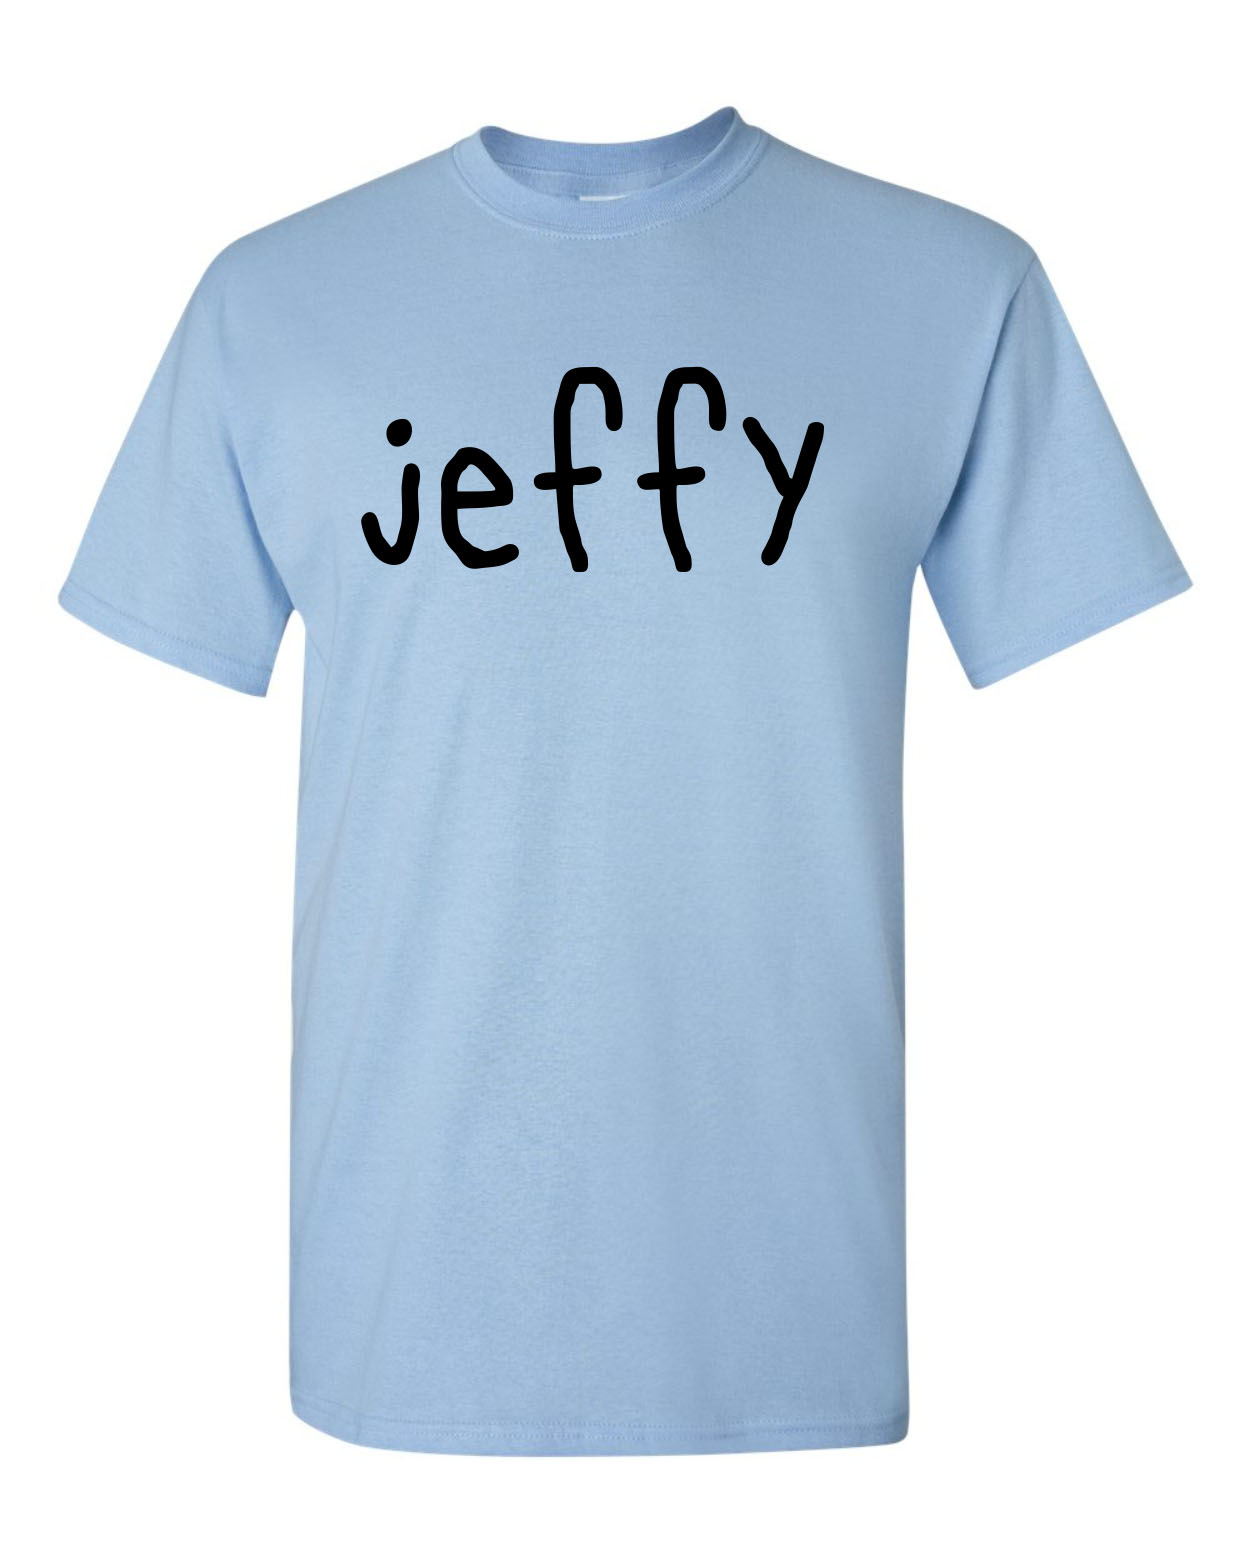 Jeffy Hanes Tagless Choose Either Youth New Men's Shirt Unisex Summer Casual Tee